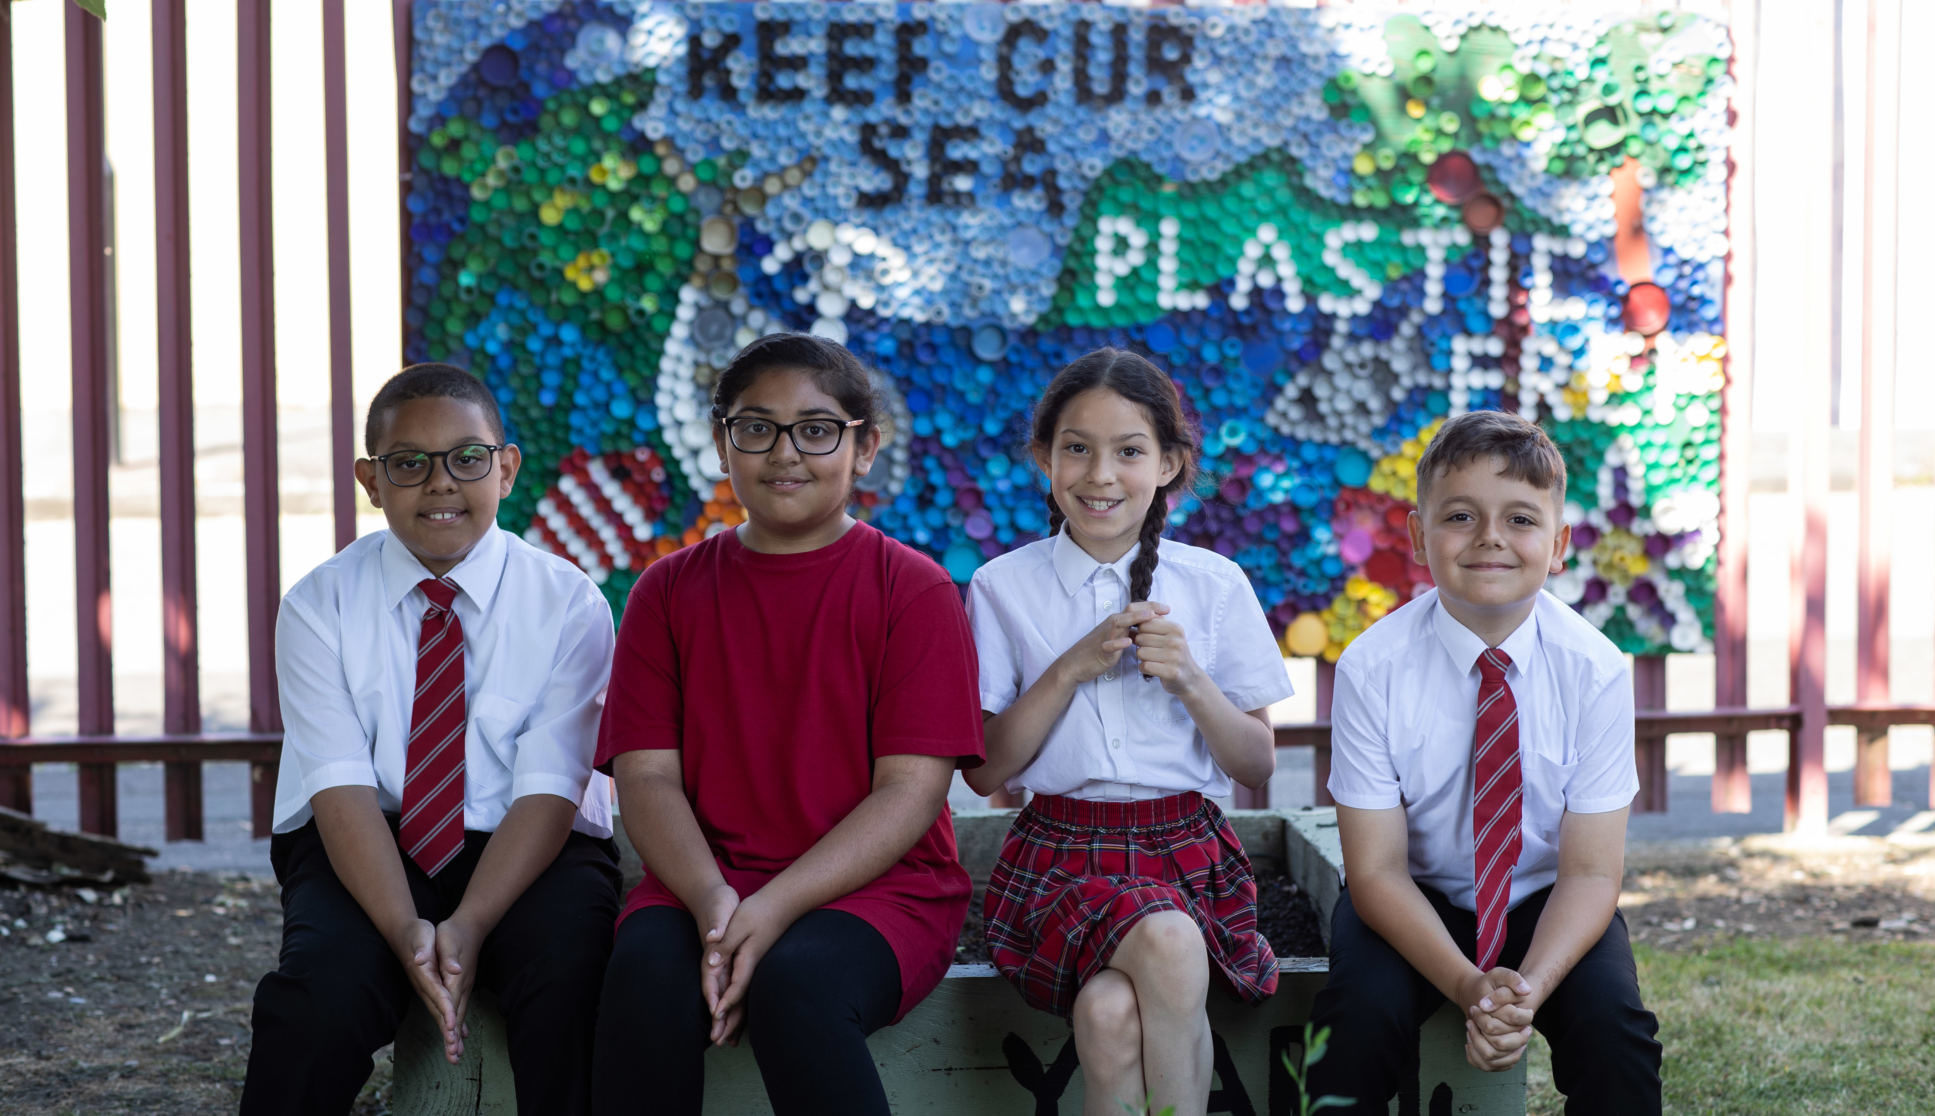 A group of four children posing in front of a 'Keep our see plastic free' display they created out of plastic lids